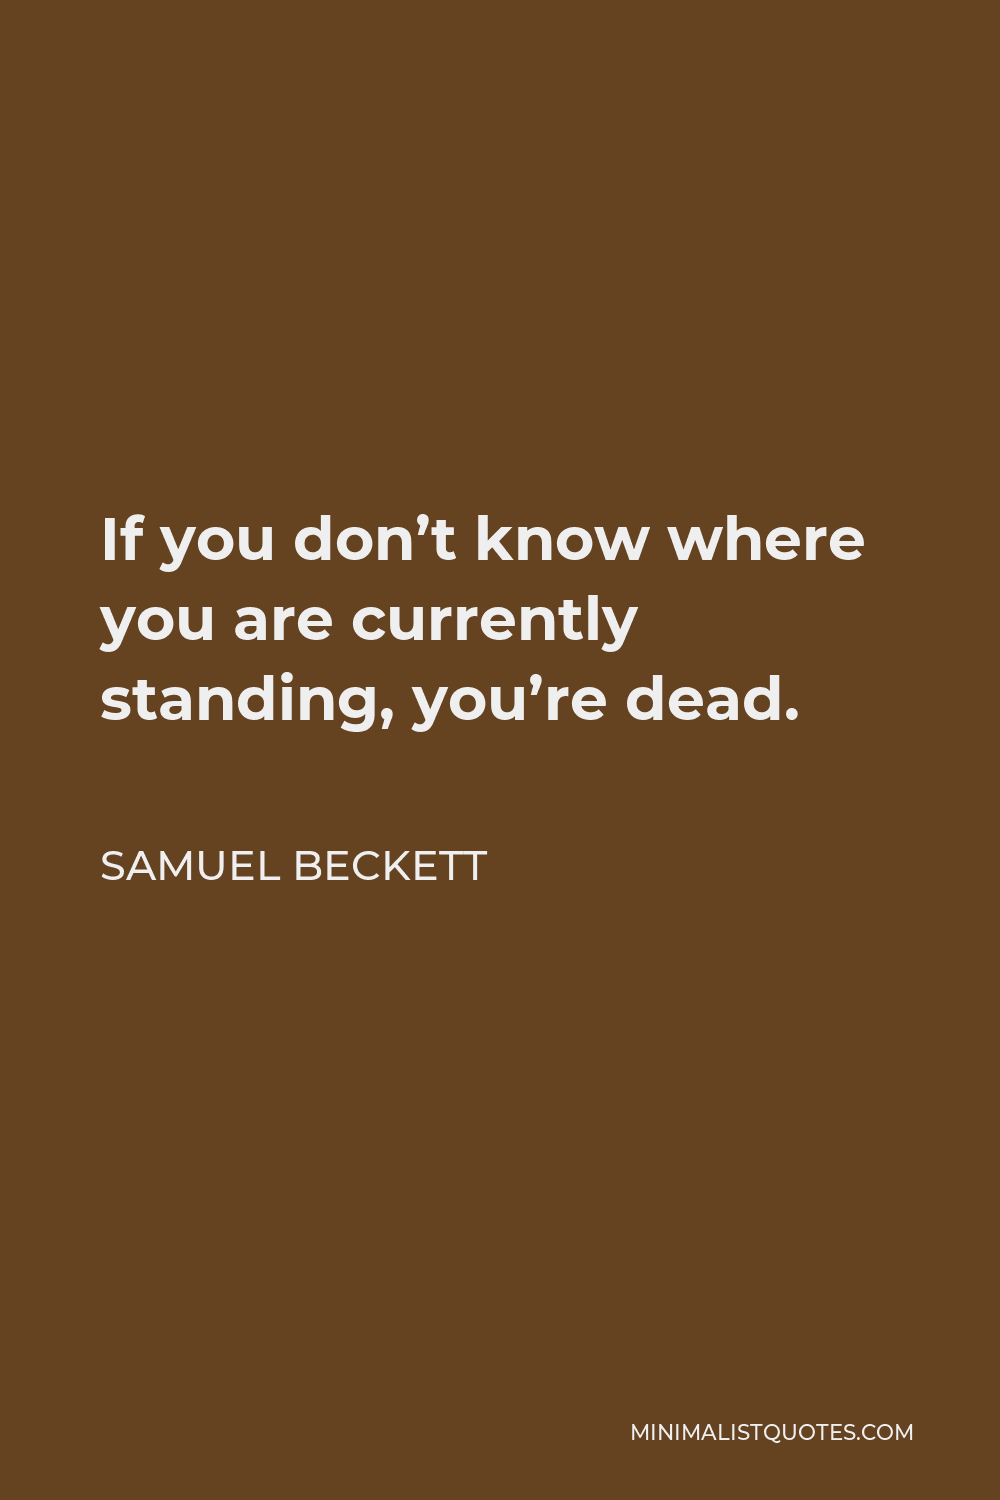 Samuel Beckett Quote - If you don’t know where you are currently standing, you’re dead.